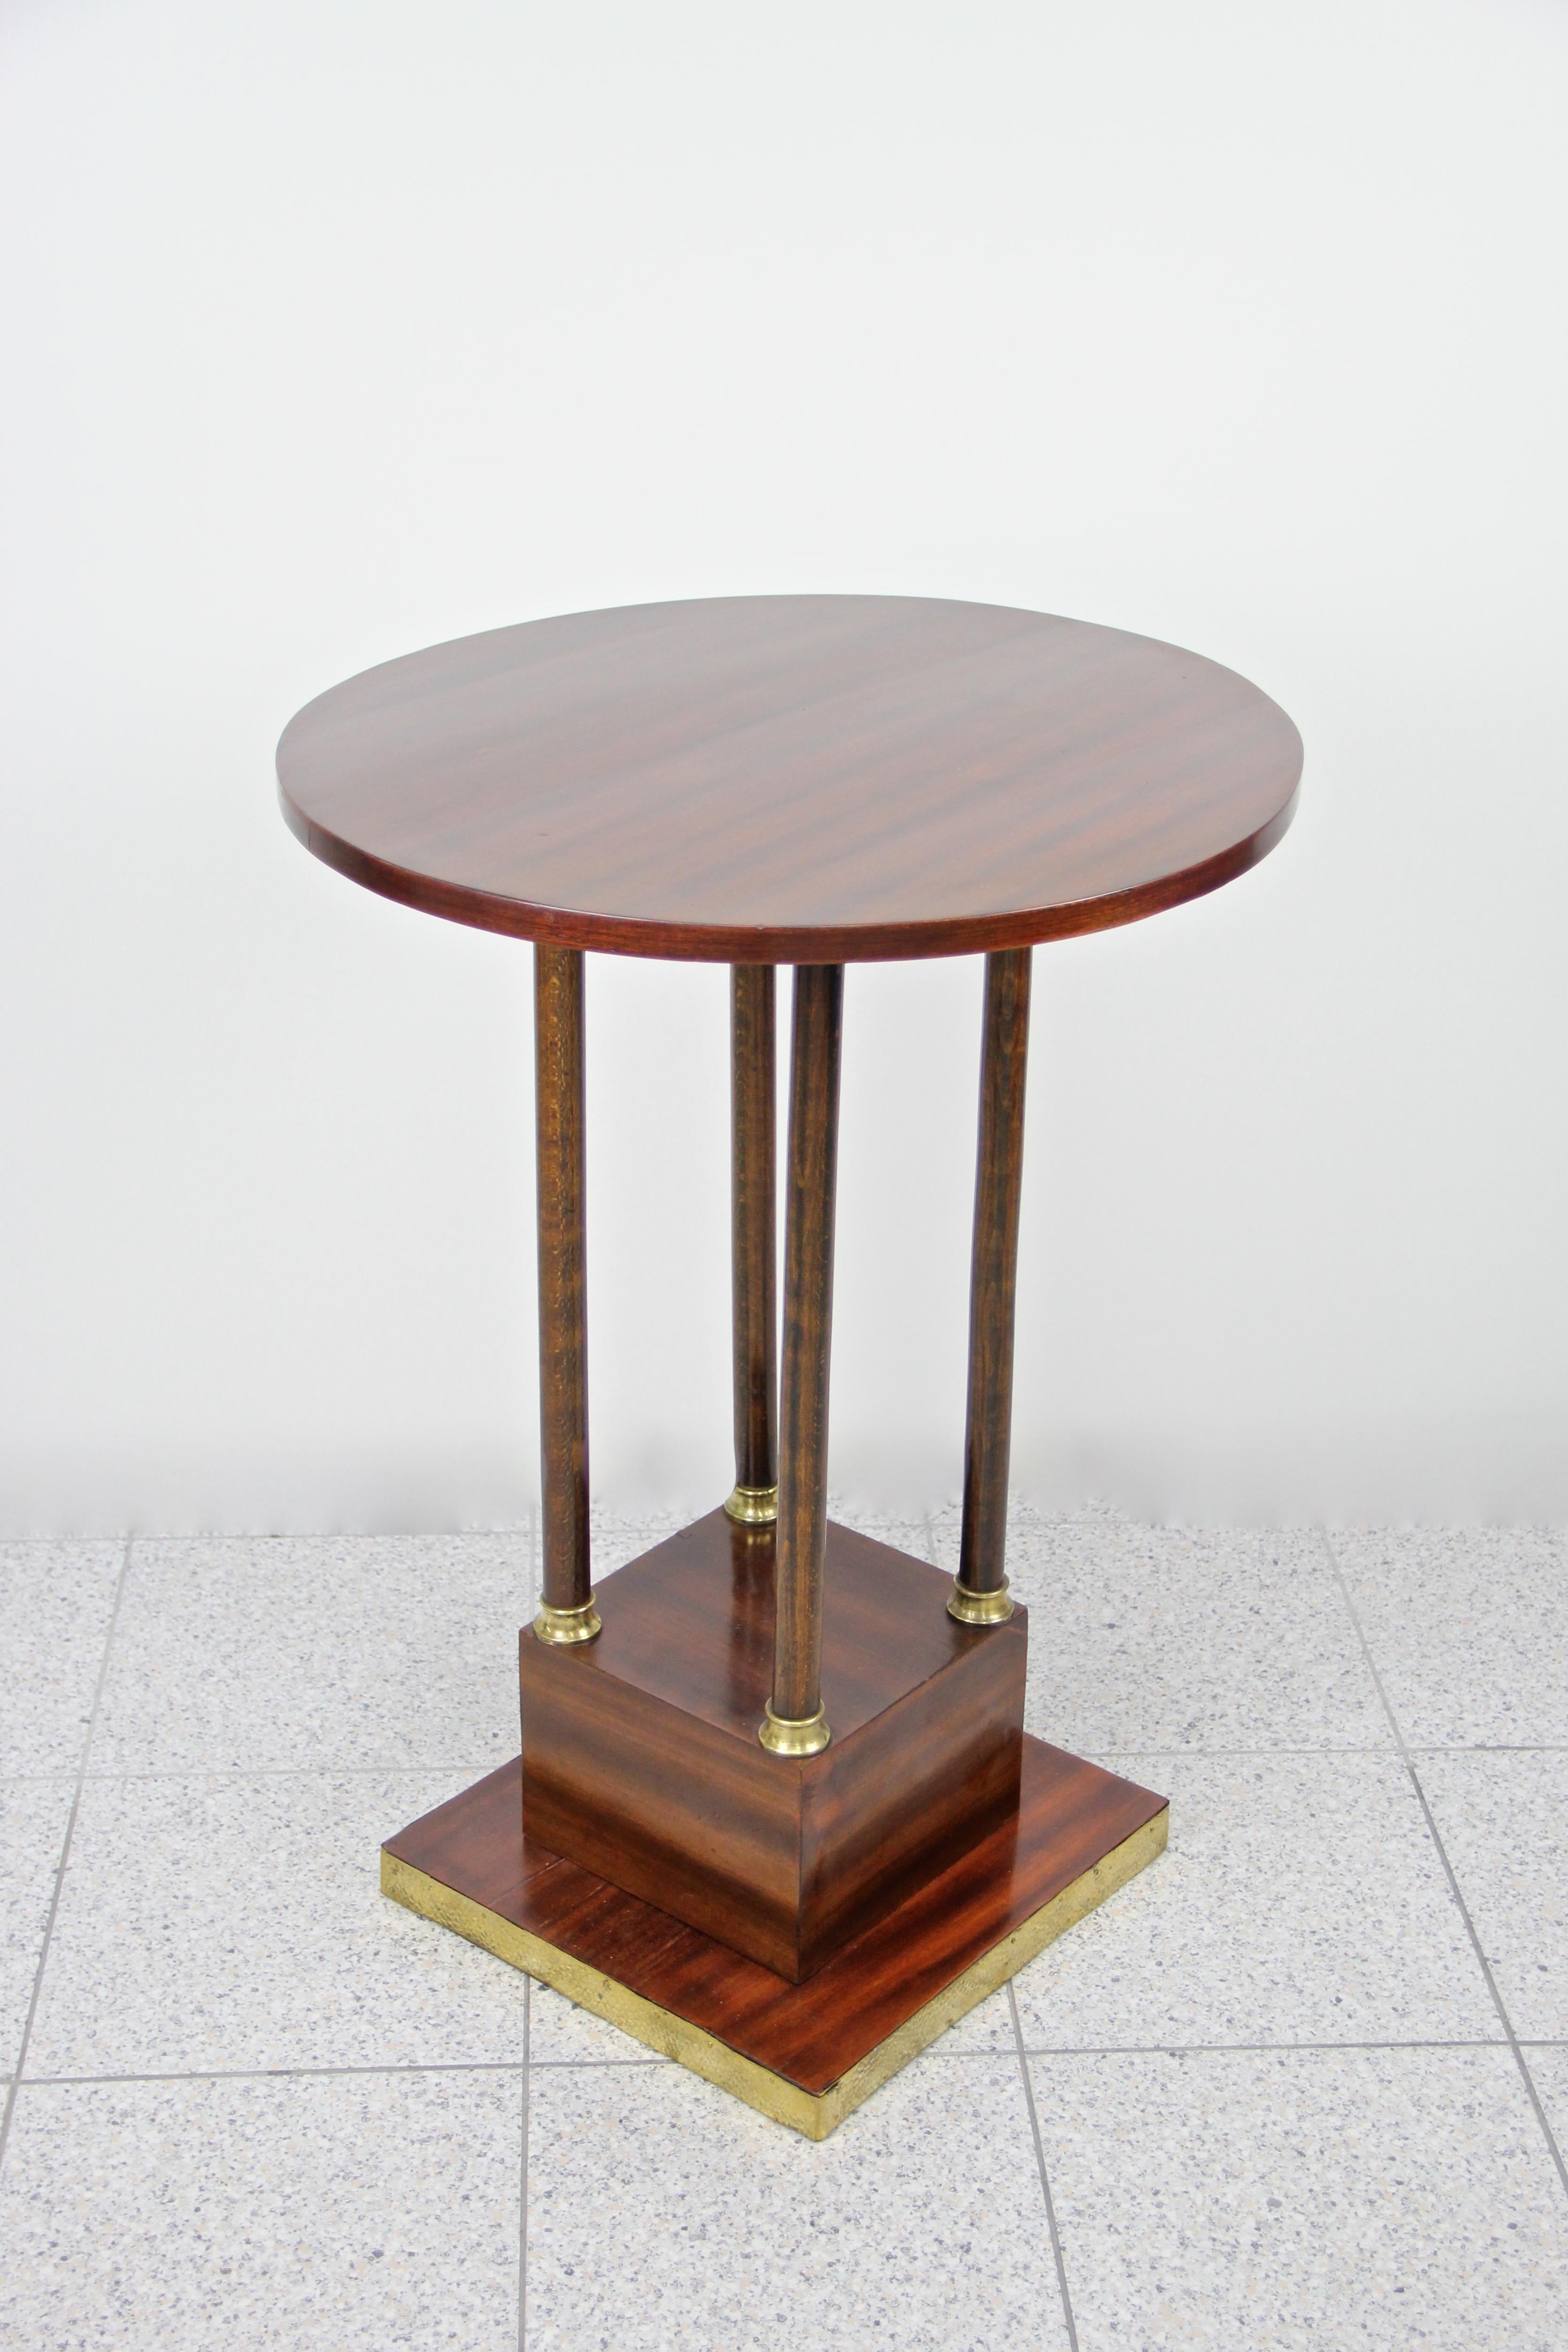 Art Nouveau Round Mahogany Coffee Table Early 20th Century, Austria, circa 1910 For Sale 4